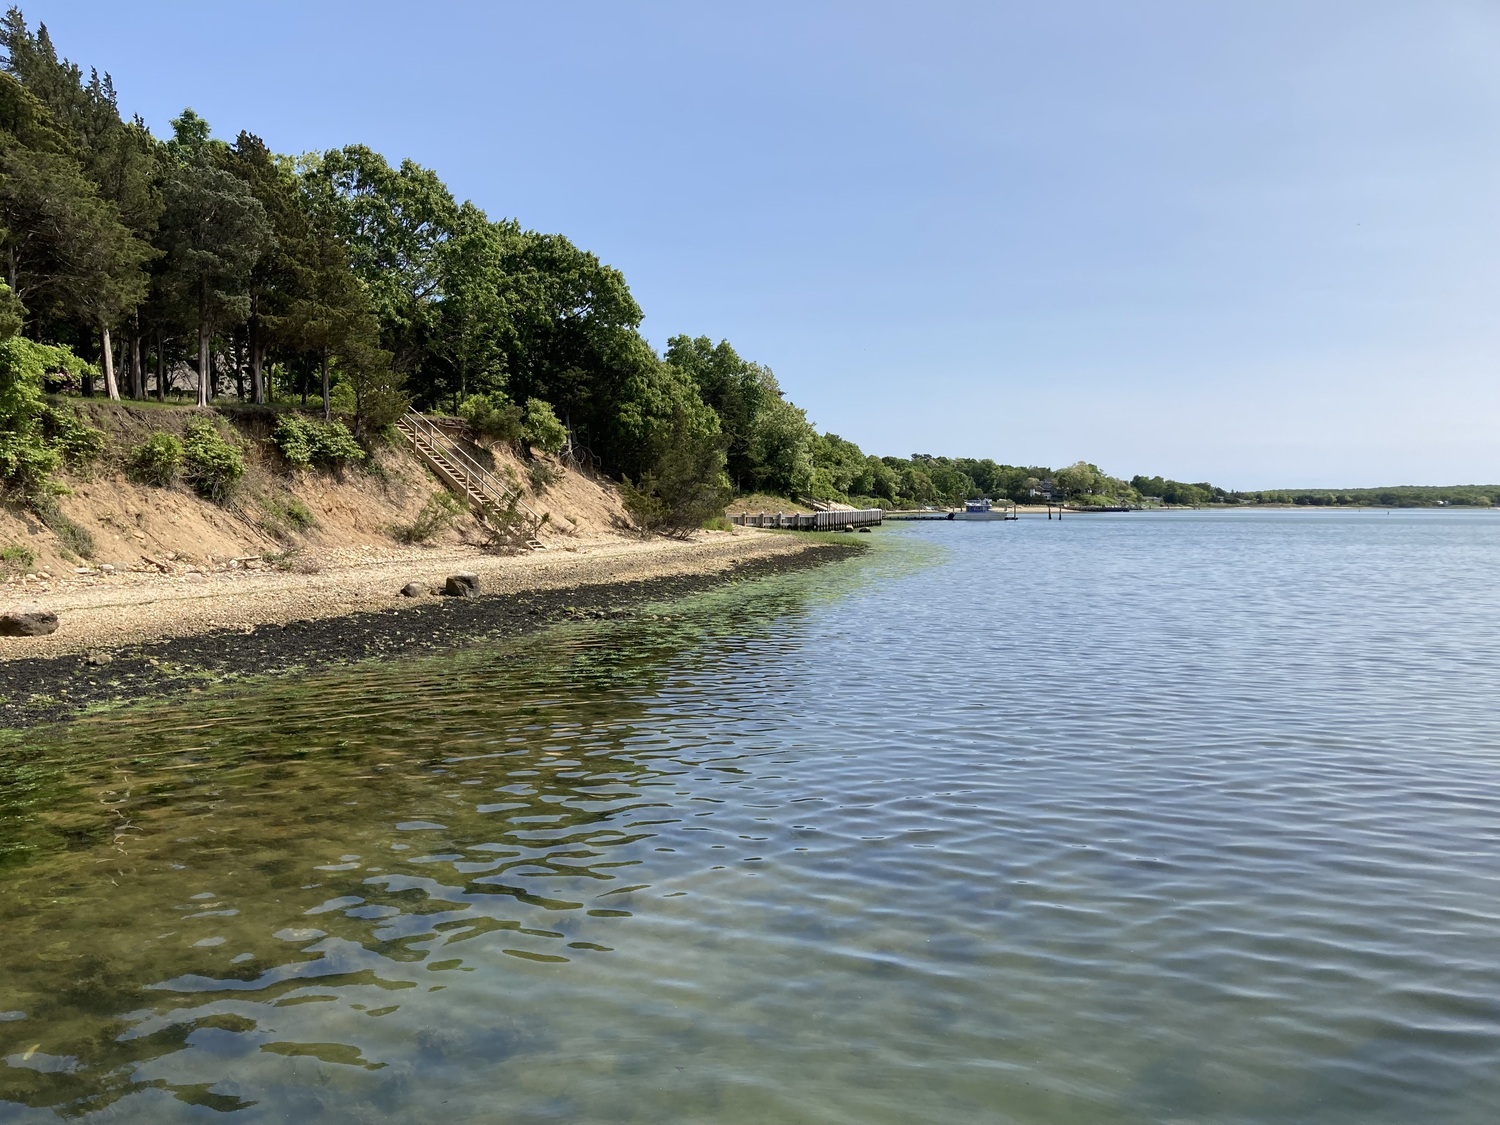 The East Hampton Town Trustees are considering banning the construction of new docks along the last section of shoreline in the town where they are technically allowed, on the eastern side of Three Mile Harbor. The Trustees said they have heard no objections to the idea over the last two years of examining their current dock policies. 
KYRIL BROMLEY